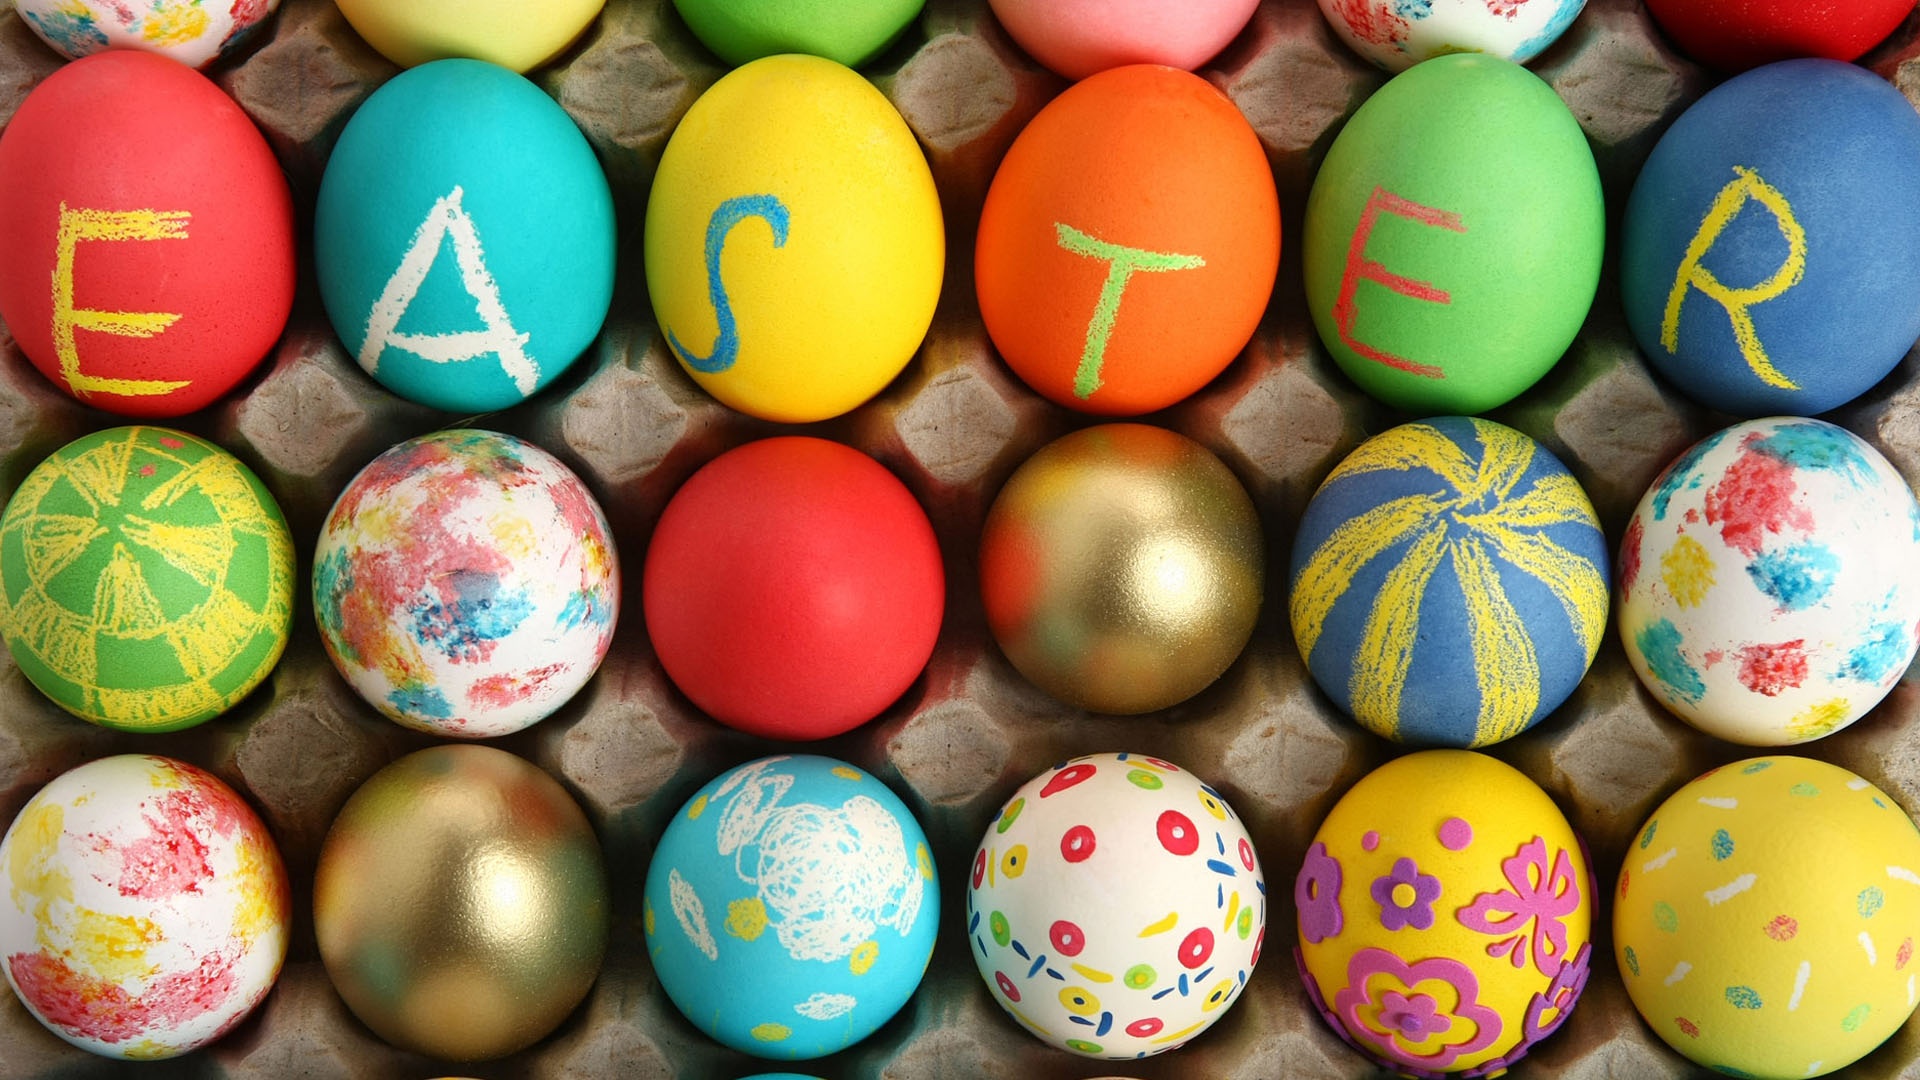 Quick (Completely Made Up) Easter Fun Facts